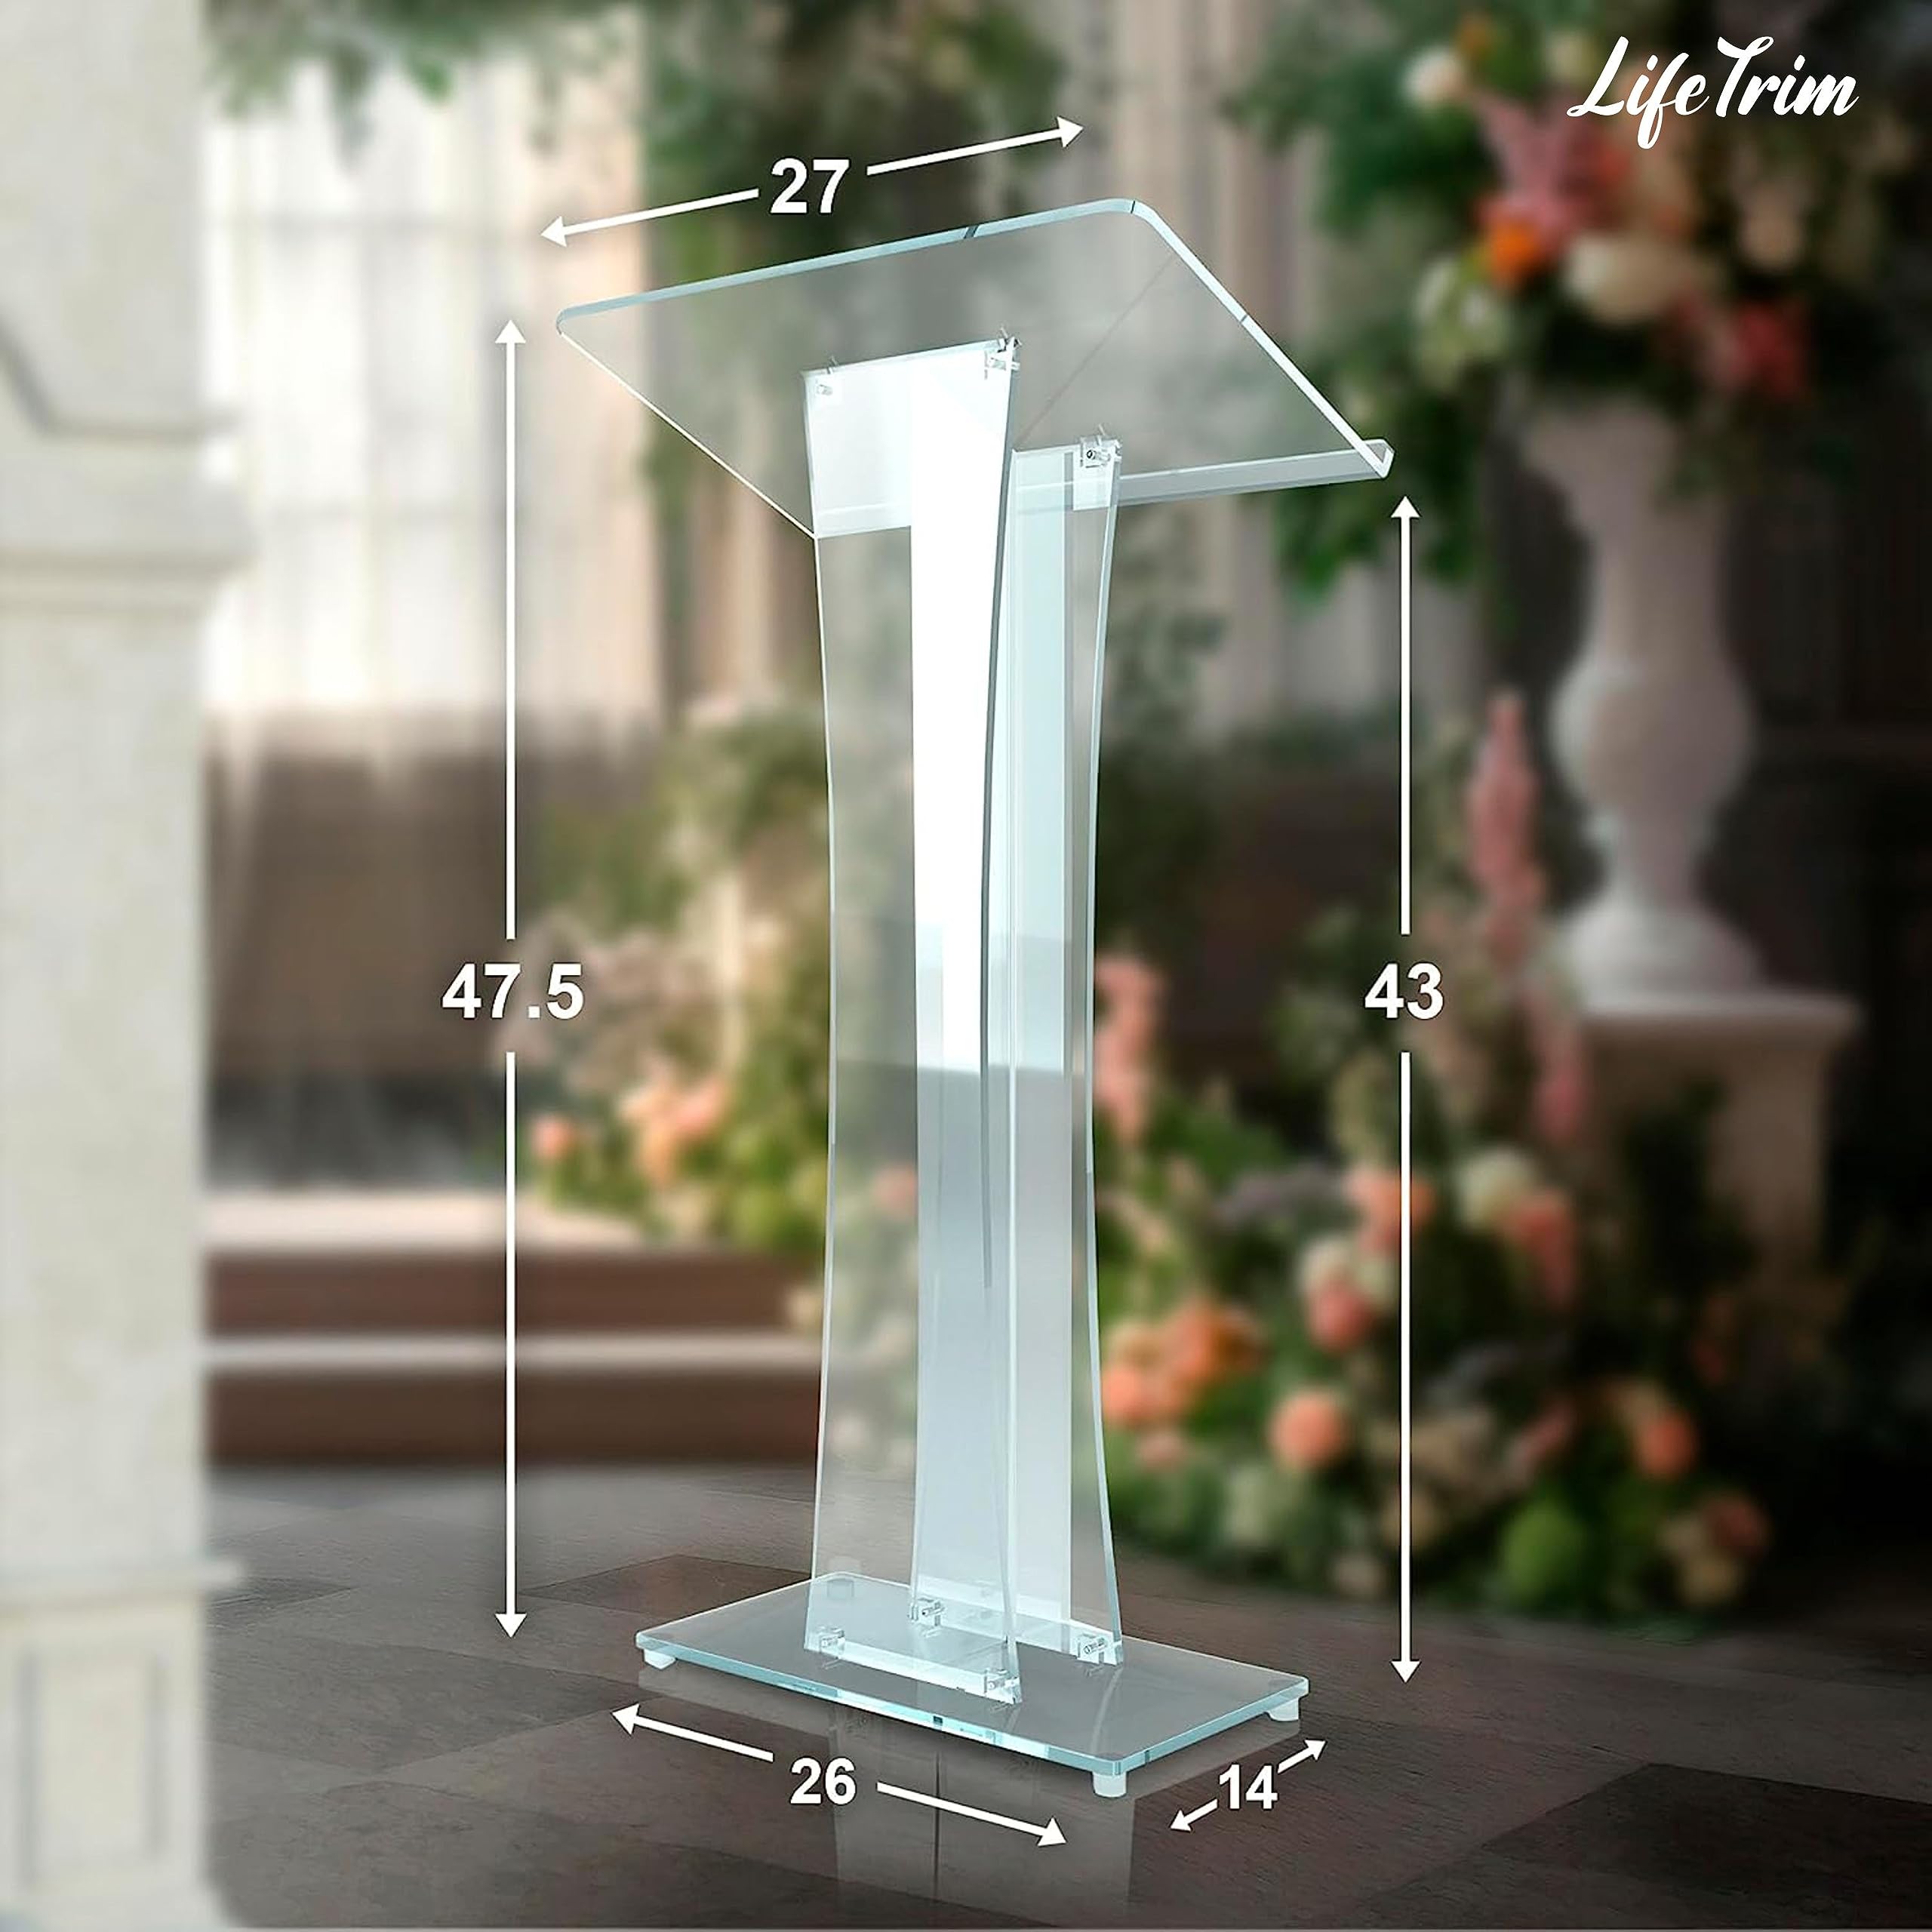 Acrylic Podium Stand Portable Pulpits for Churches Clear Podium Lectern Shtender Hostess Stand Presentation Events Teacher Podium for Classroom Church Pulpit Transparent Modern Lecterns & Podiums